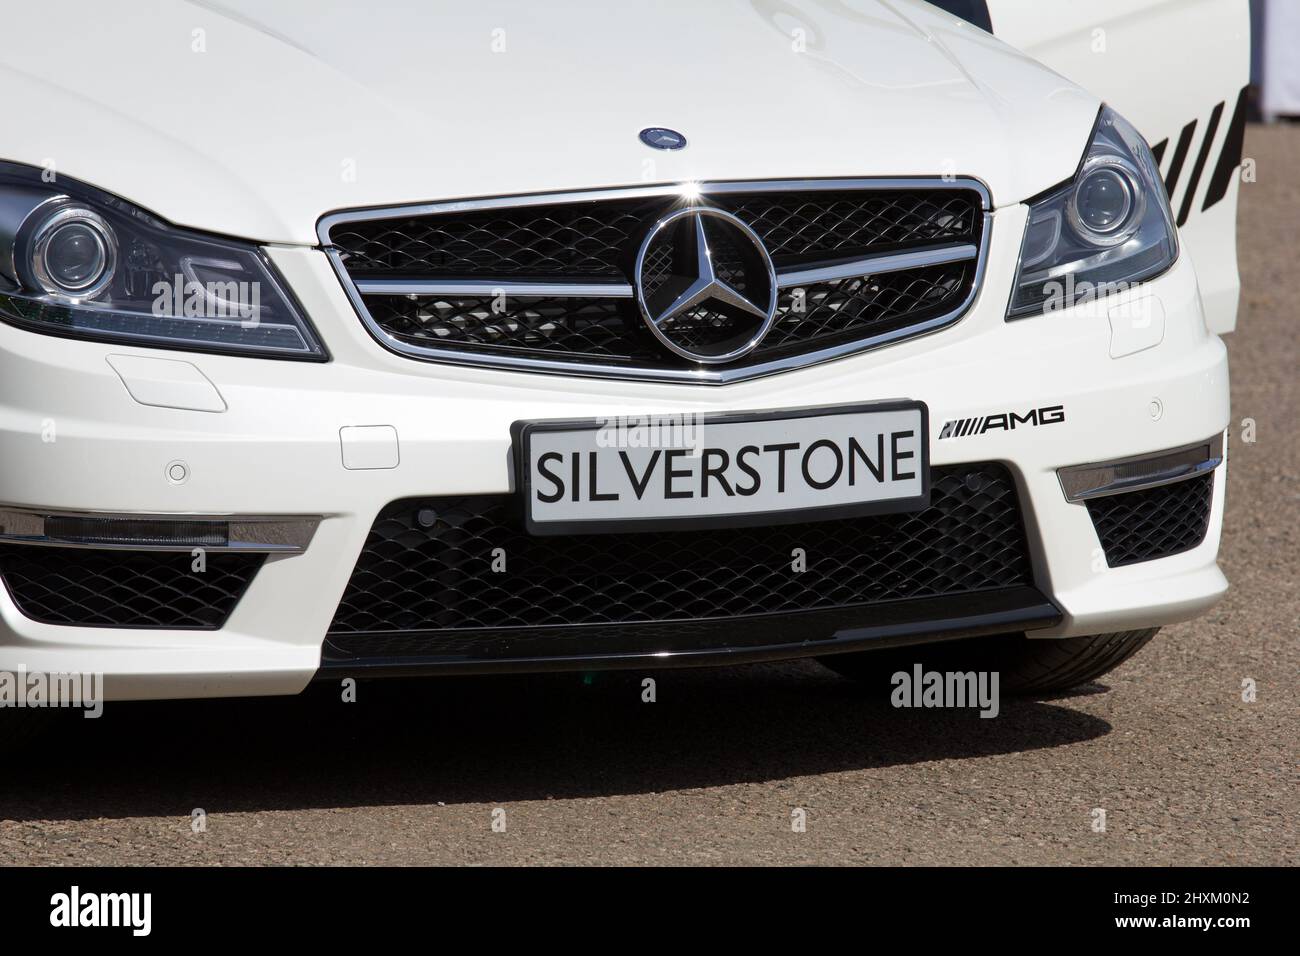 Silverstone Race Track promotional / safety car Mercedes Benz Stock Photo